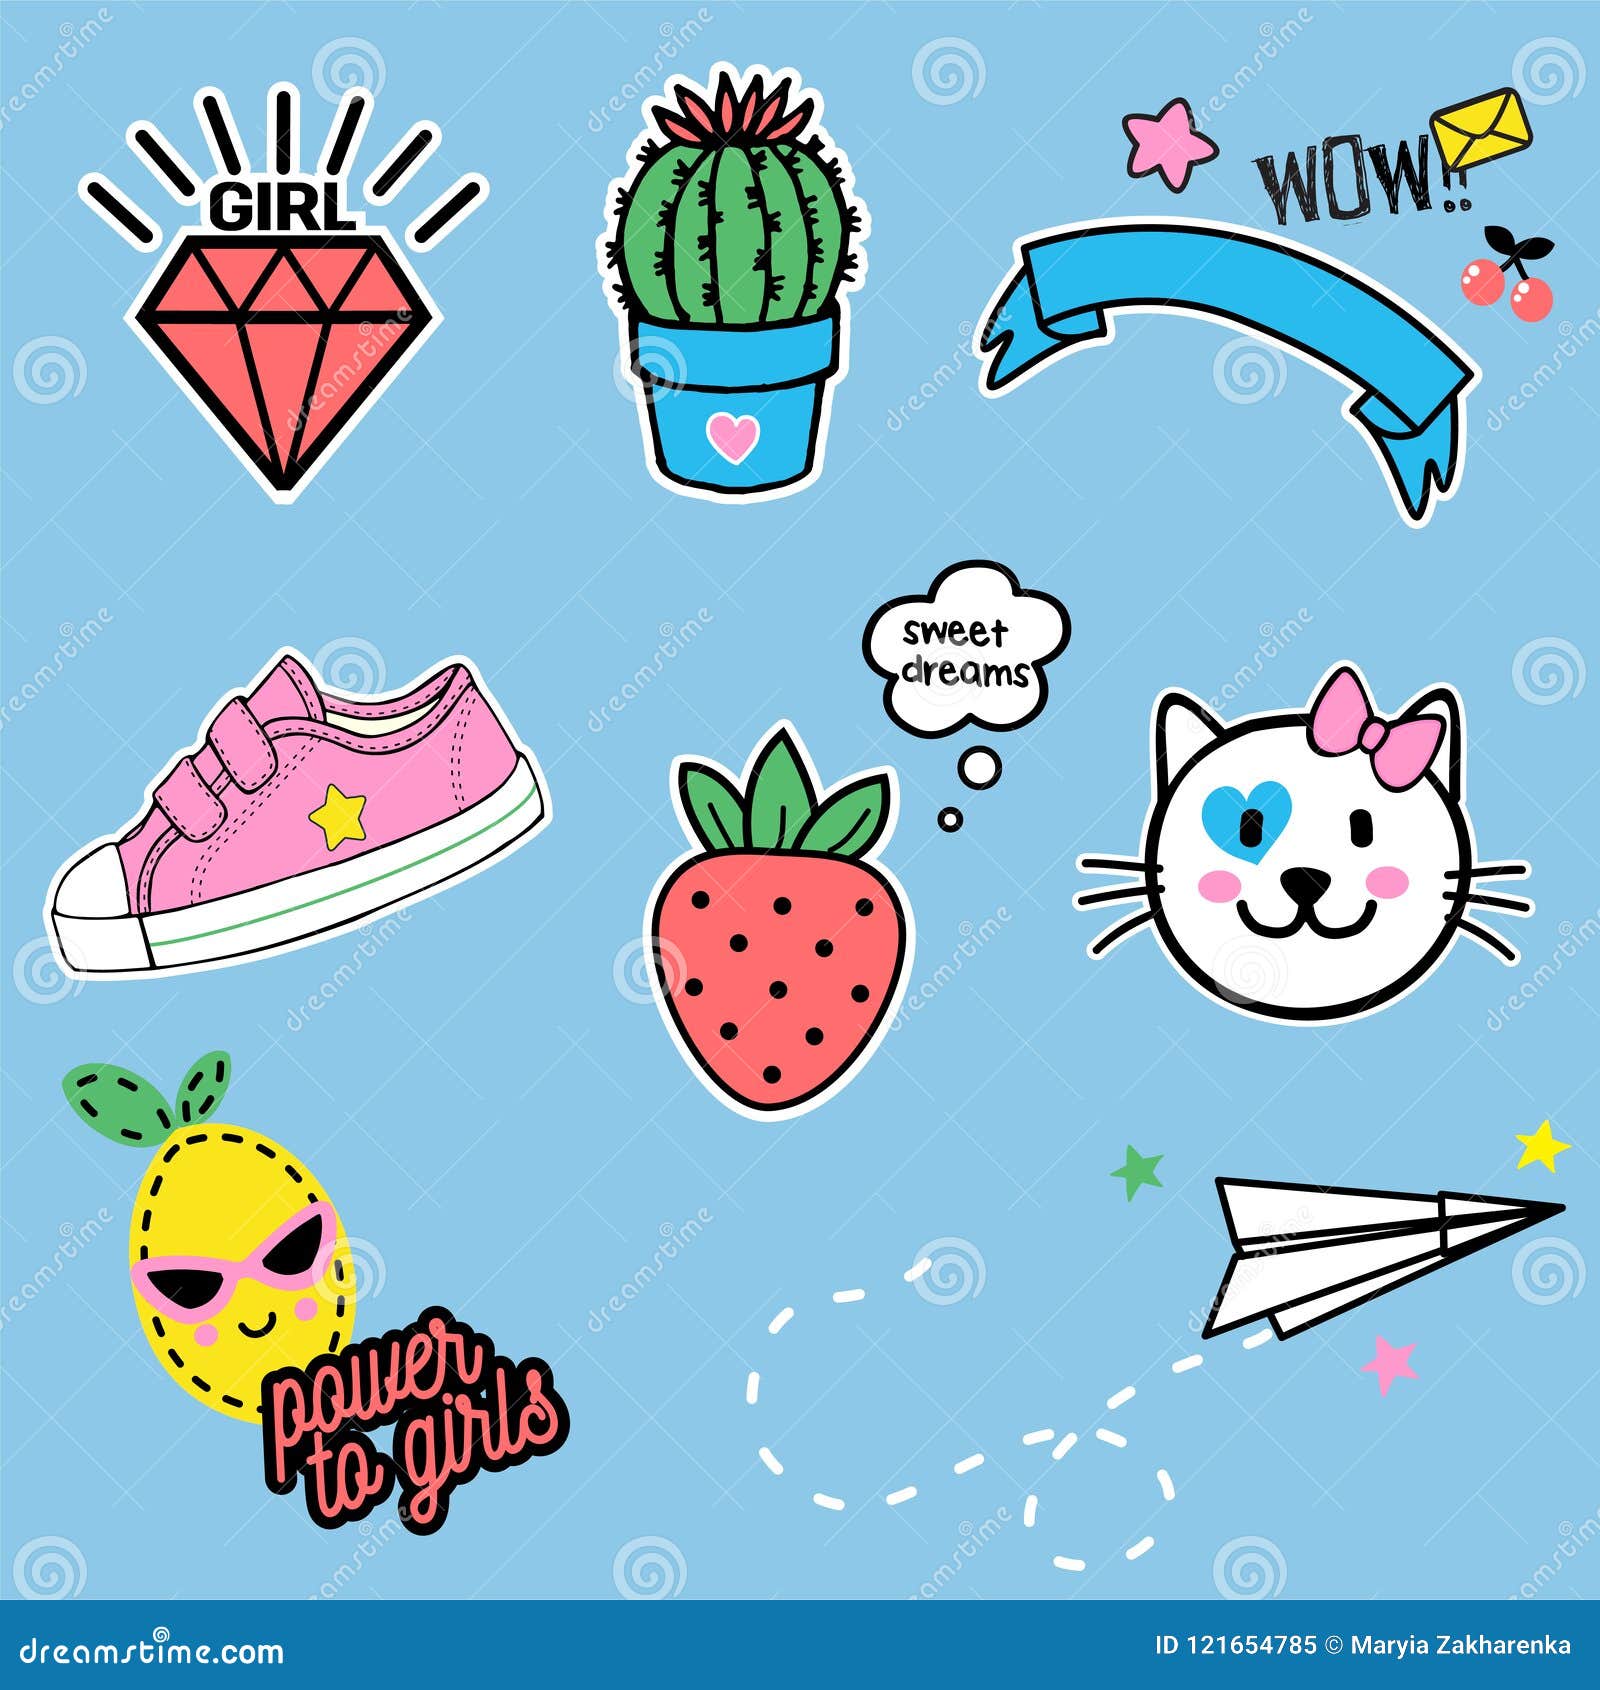 Cartoon Stickers Or Patches Set With 90s Style Design Elements